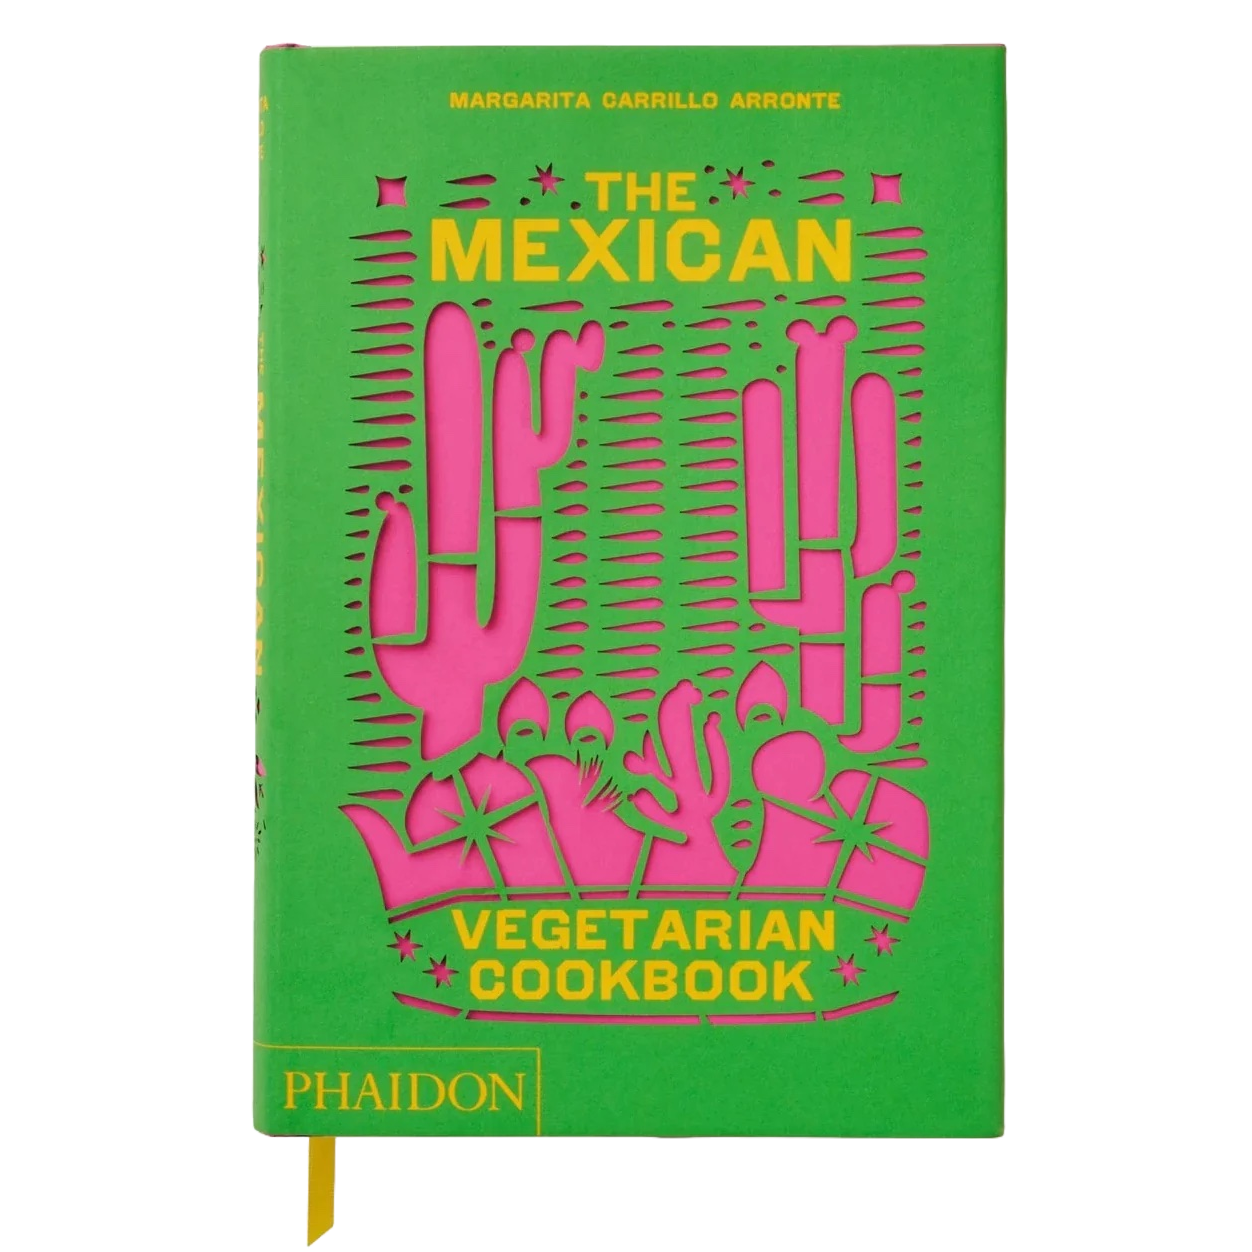 The Mexican Vegetarian Cookbook: 400 Authentic Vegetarian Recipes for the Home Cook